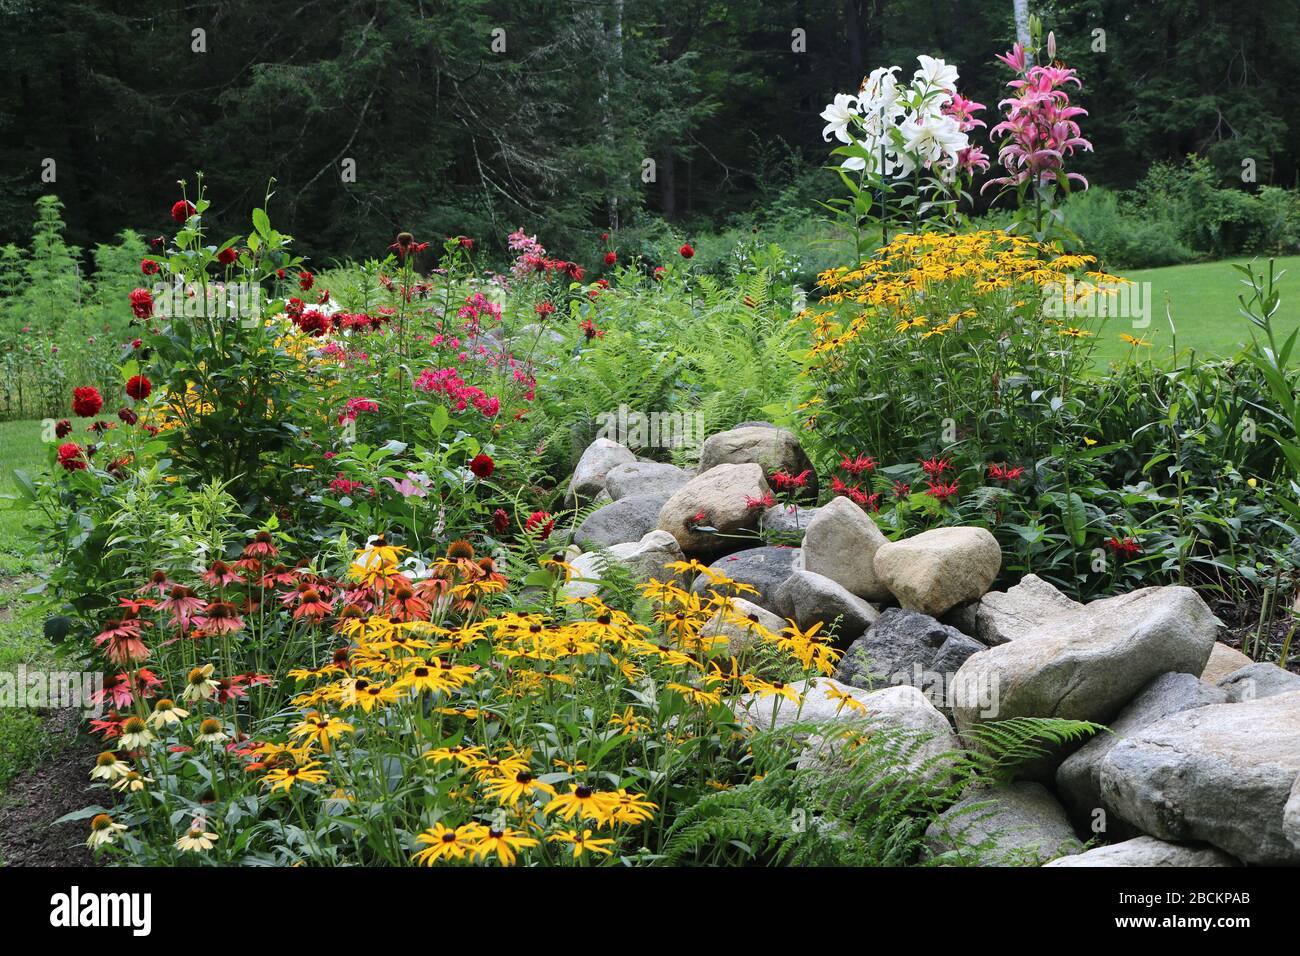 Colorful flower garden with a stonewall including rudbeckia, flox, lilies and dahlias. Stock Photo